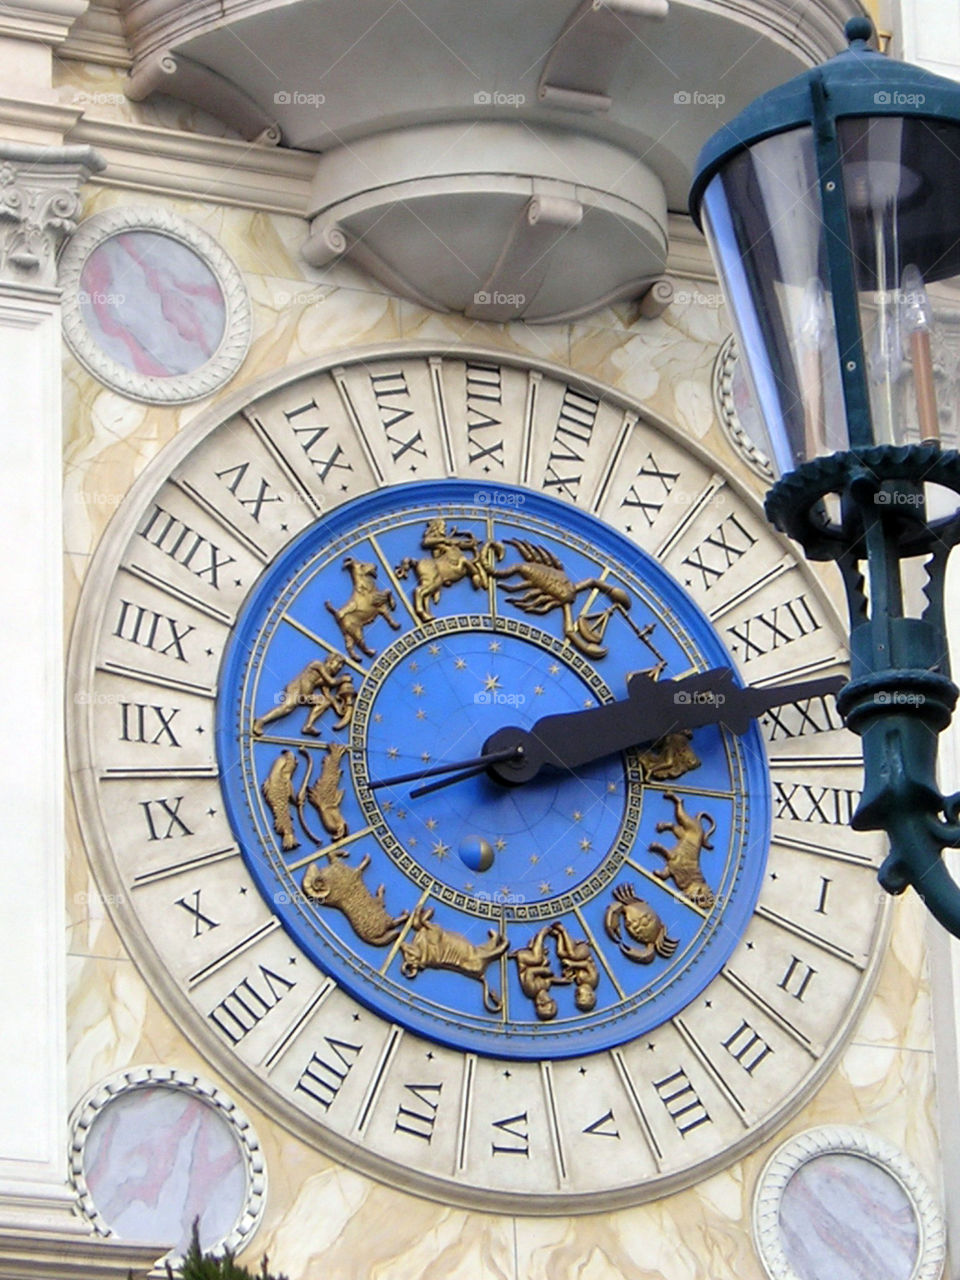 A Dramatic and fancy clock with zodiac signs and Roman numericals.